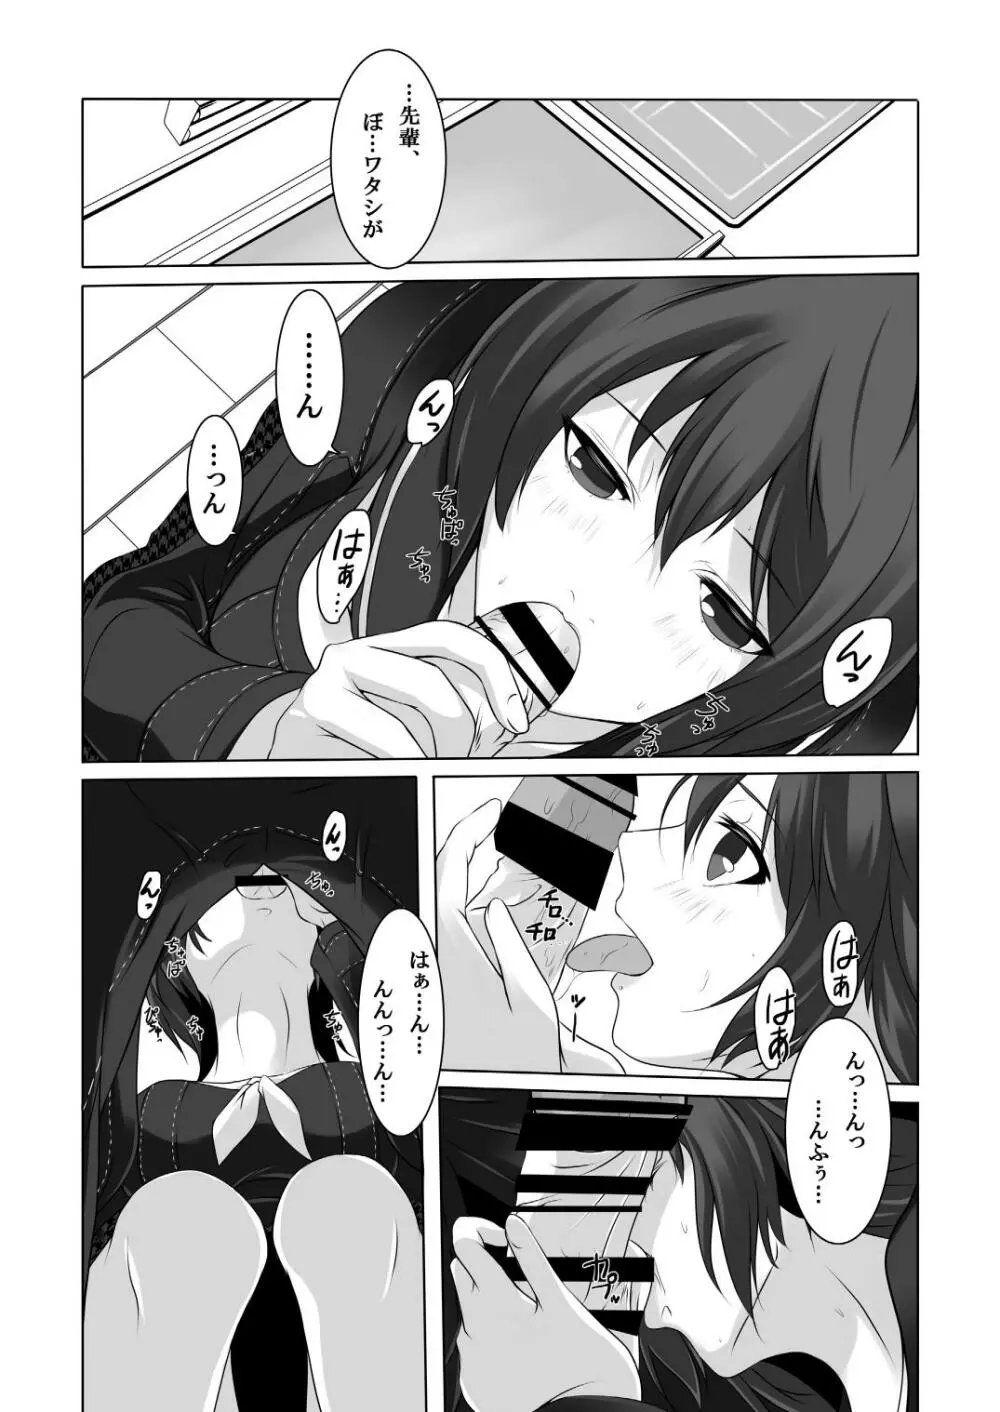 Persona 4: The Doujin #3 #4 Page.9